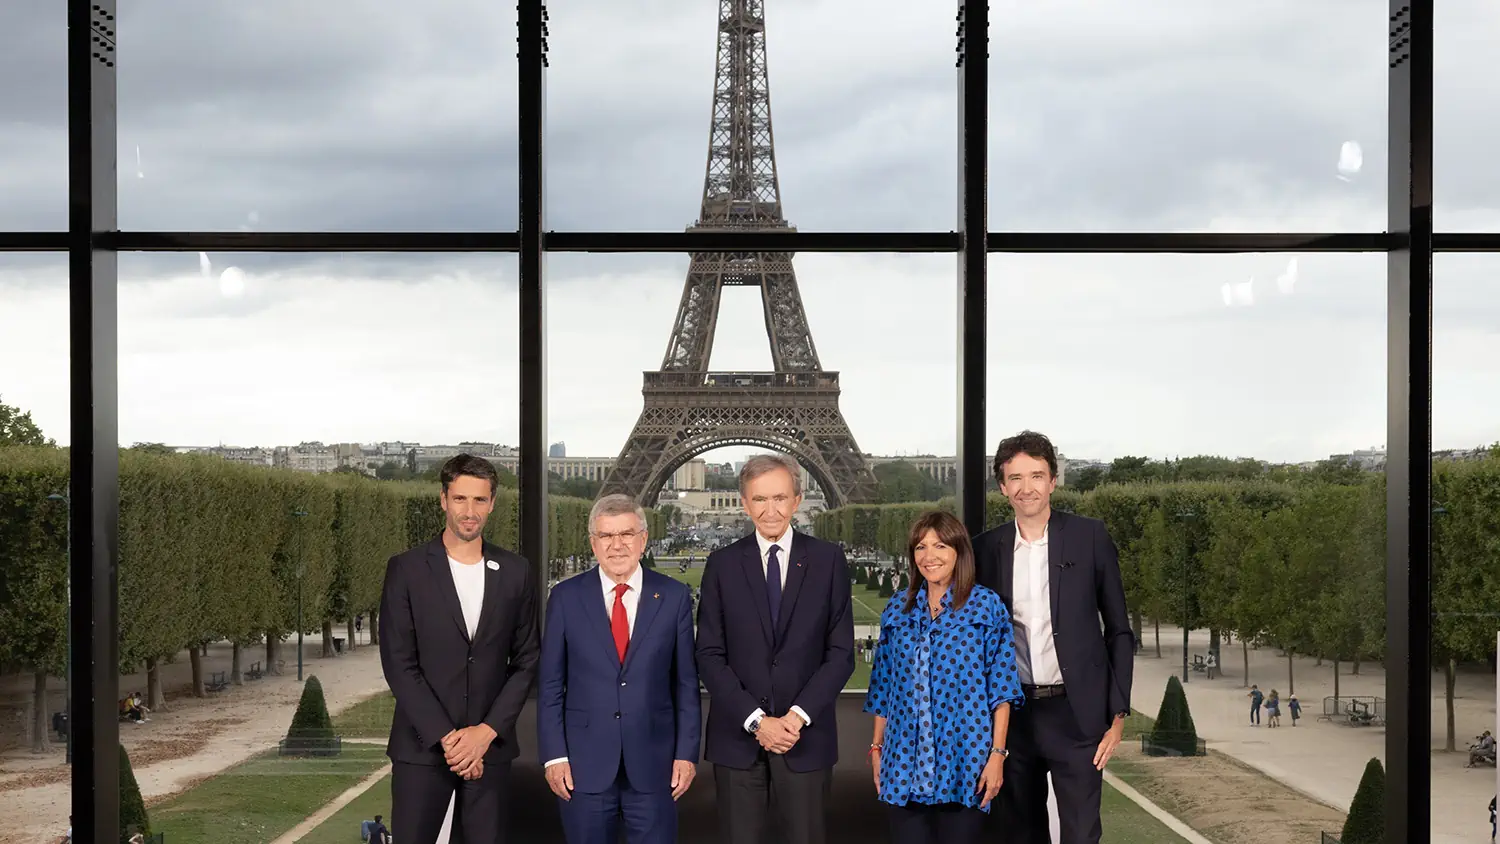 LVMH embellishes the Paris 2024 Olympic and Paralympic Games with luxury